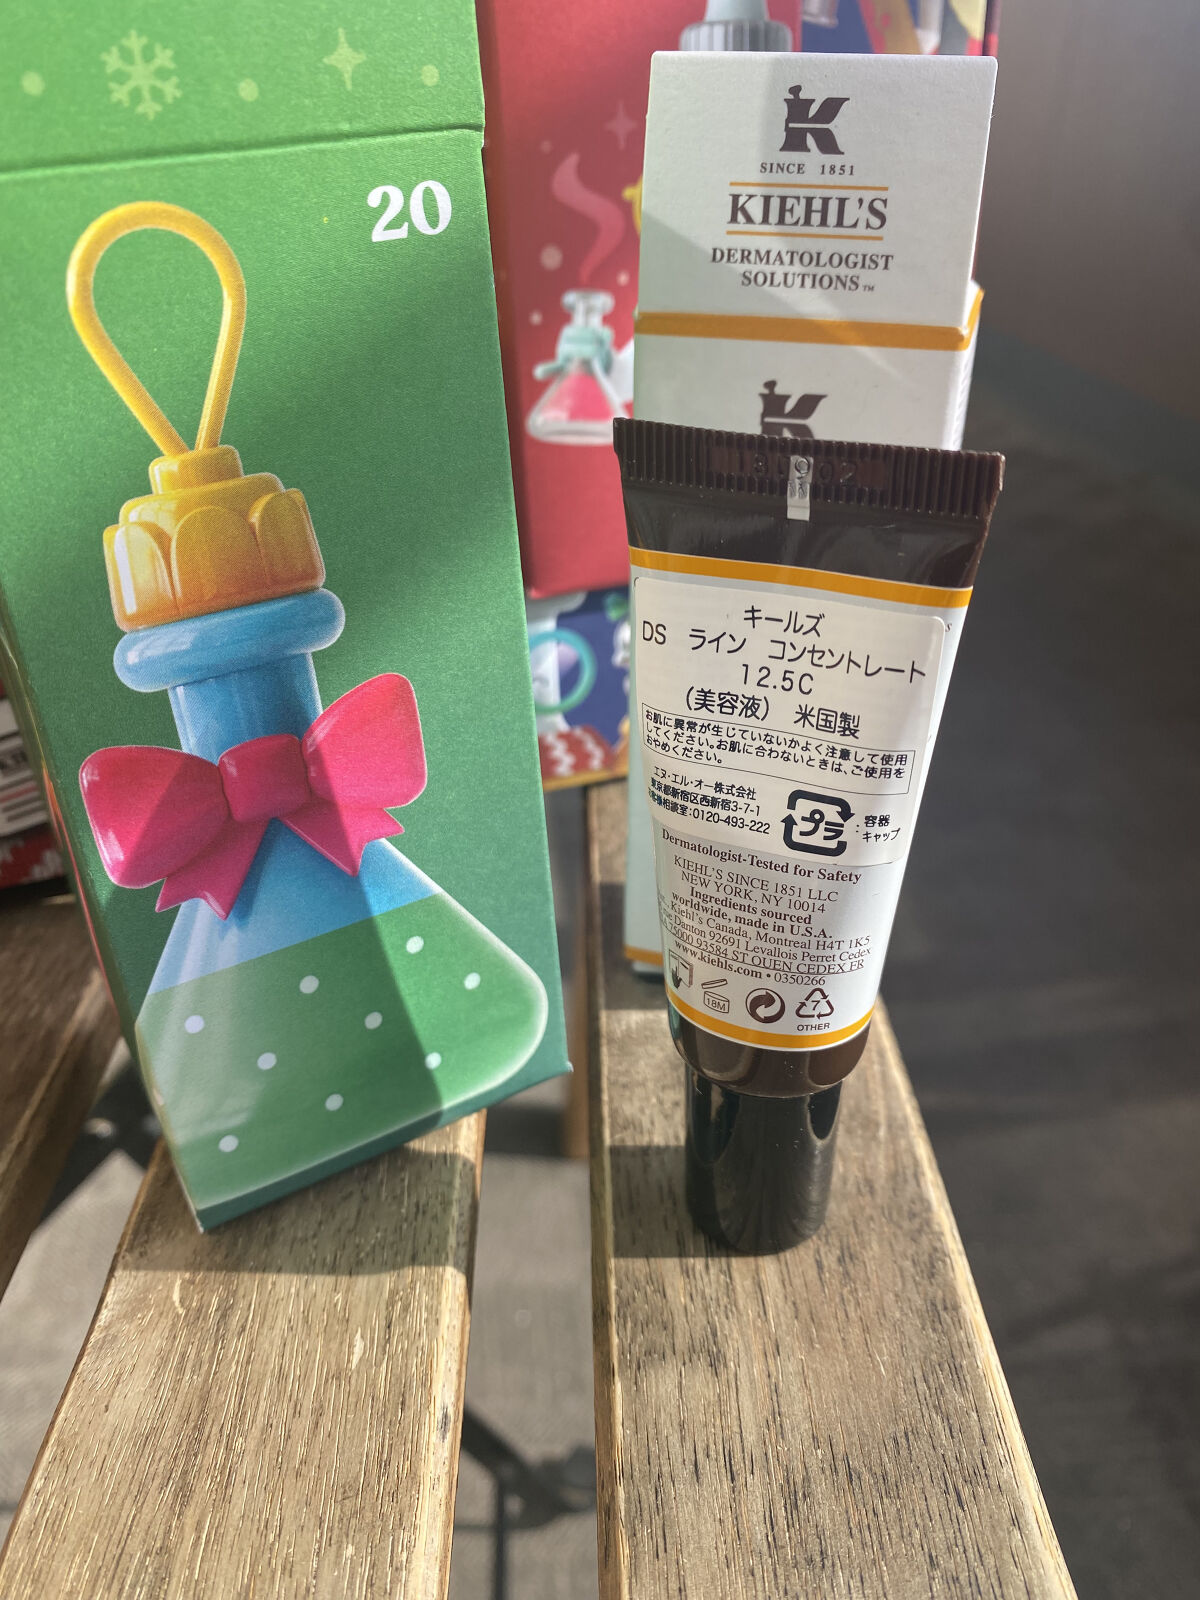 HOT新品 Kiehl's - ﾚﾀｰﾊﾟｯｸﾌﾟﾗｽ ｷｰﾙｽﾞ 100 DS コンセントレートの通販 ...